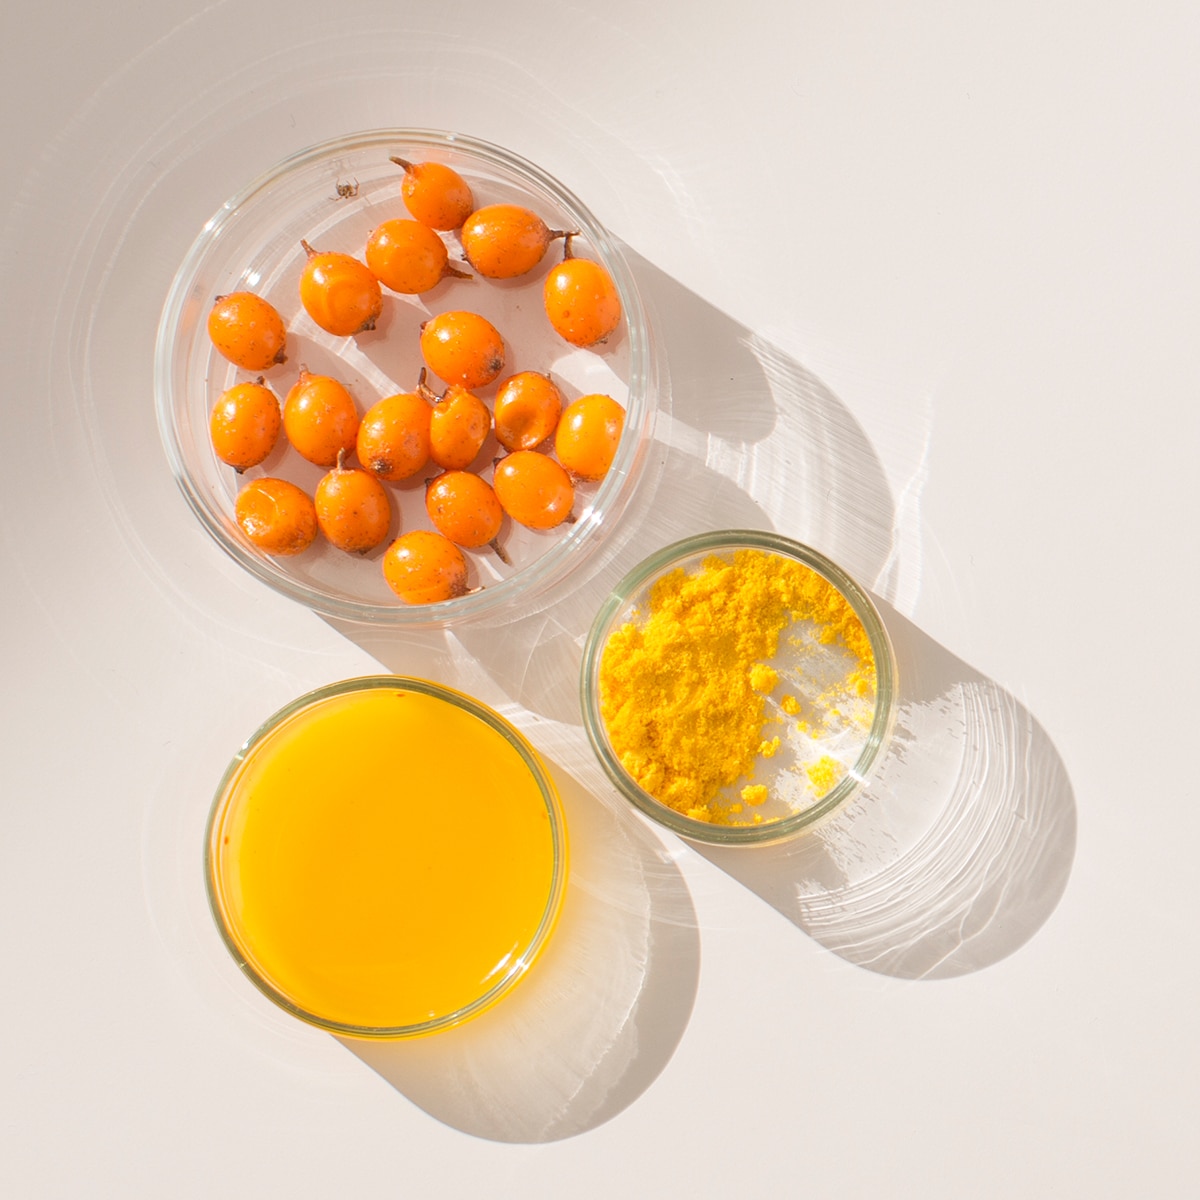 Seabuckthorn berries and extract